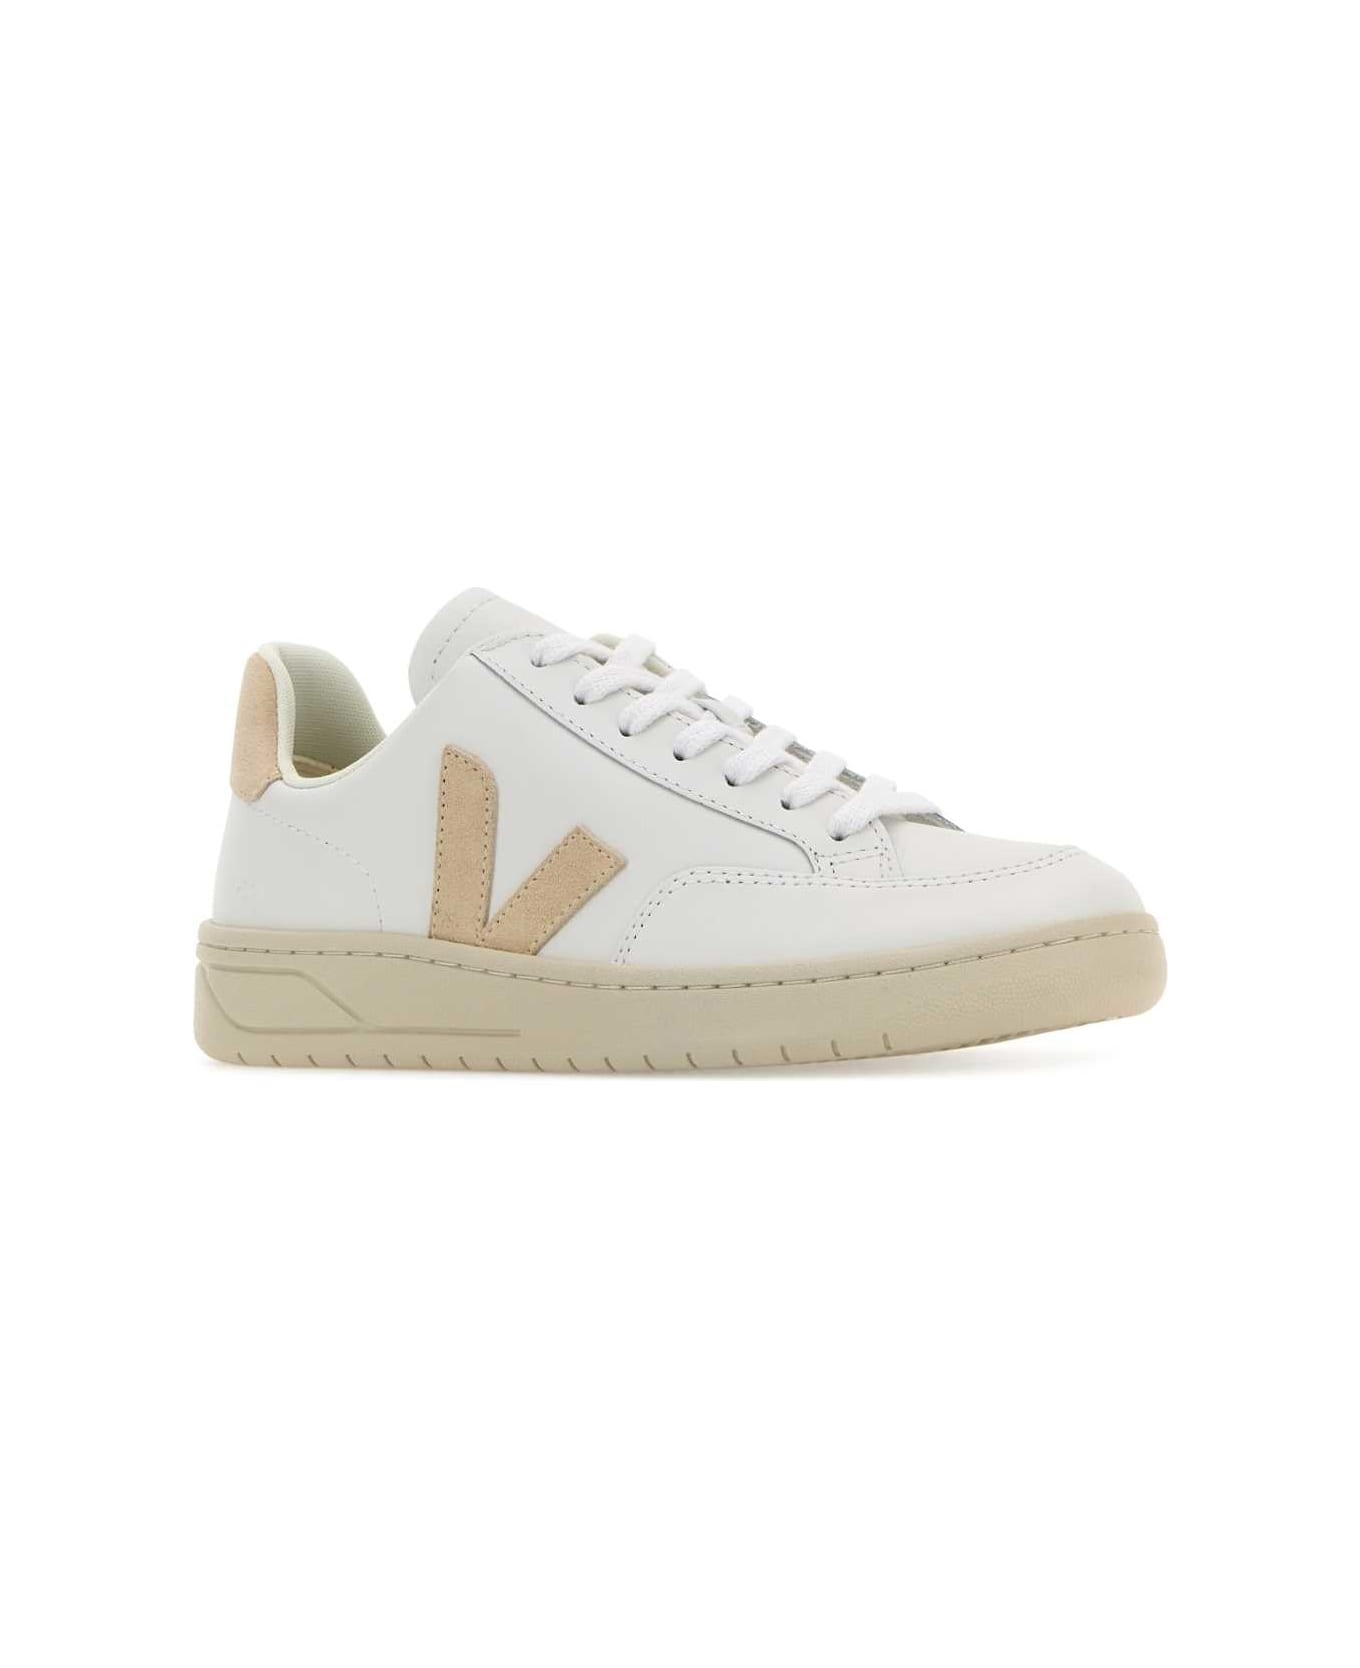 White Leather V-12 Sneakers - 2